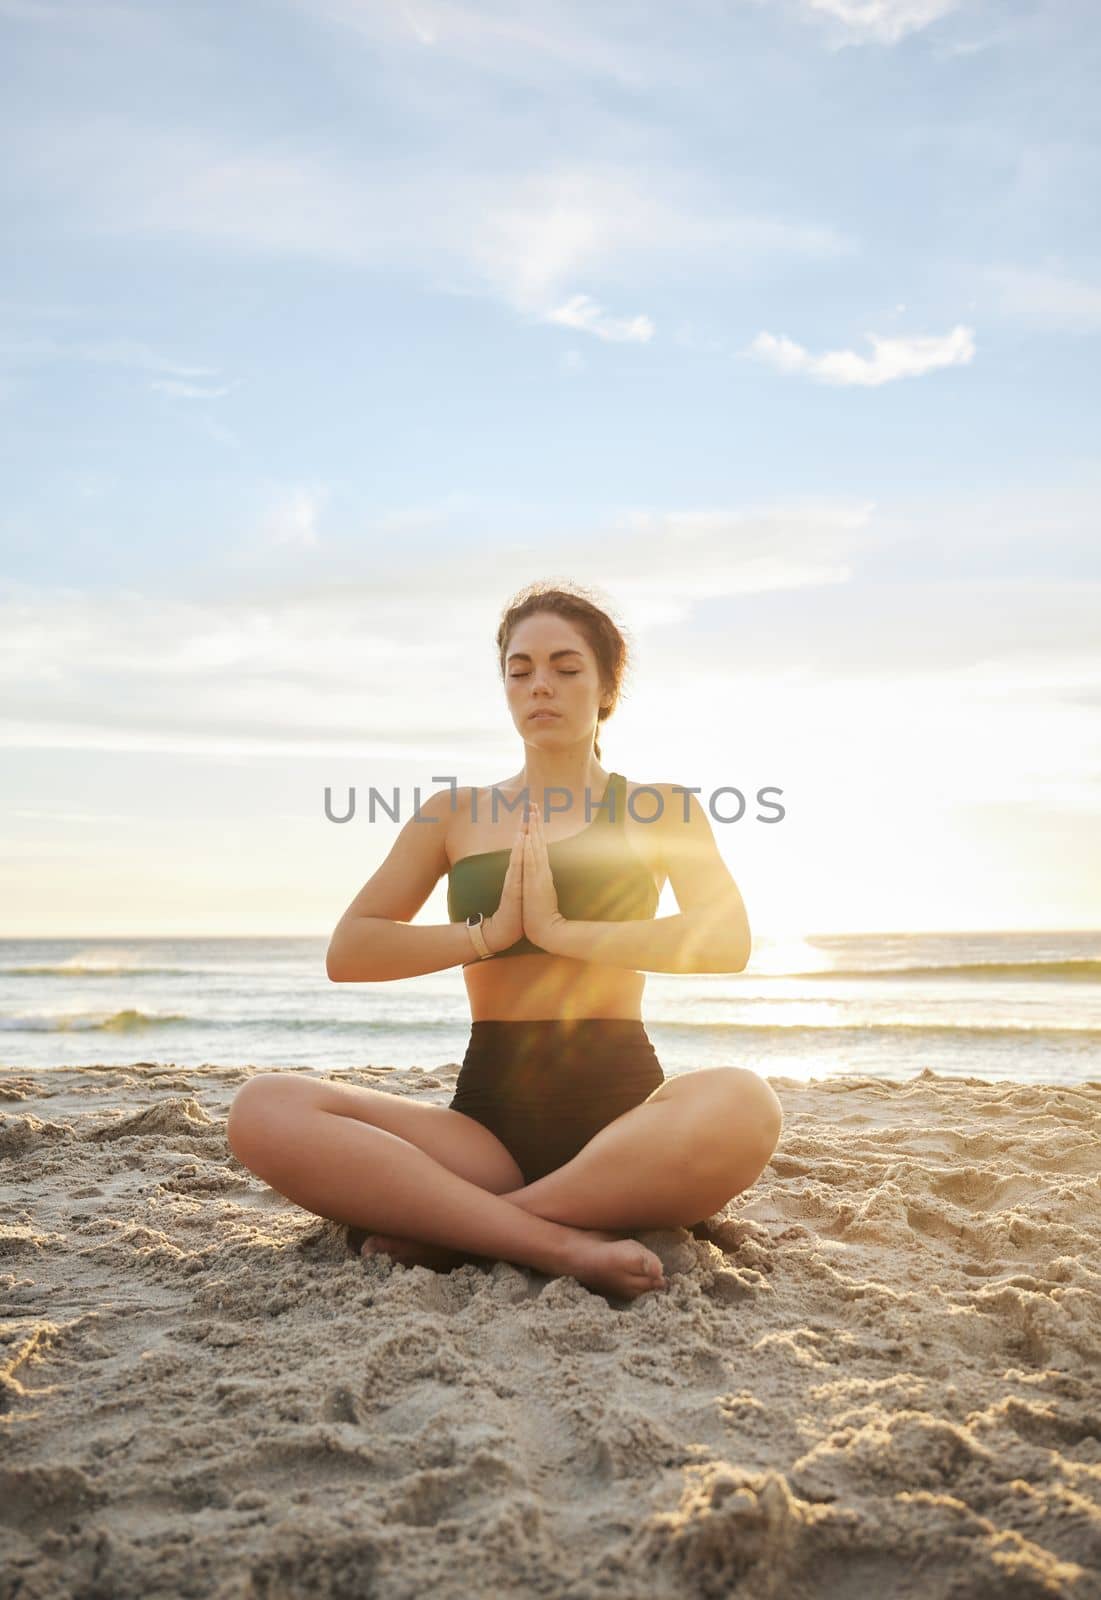 Woman, yoga and meditation on the beach in namaste for spiritual wellness or zen workout in the sunset. Female yogi relaxing and meditating for calm, peaceful mind or awareness by the ocean coast.